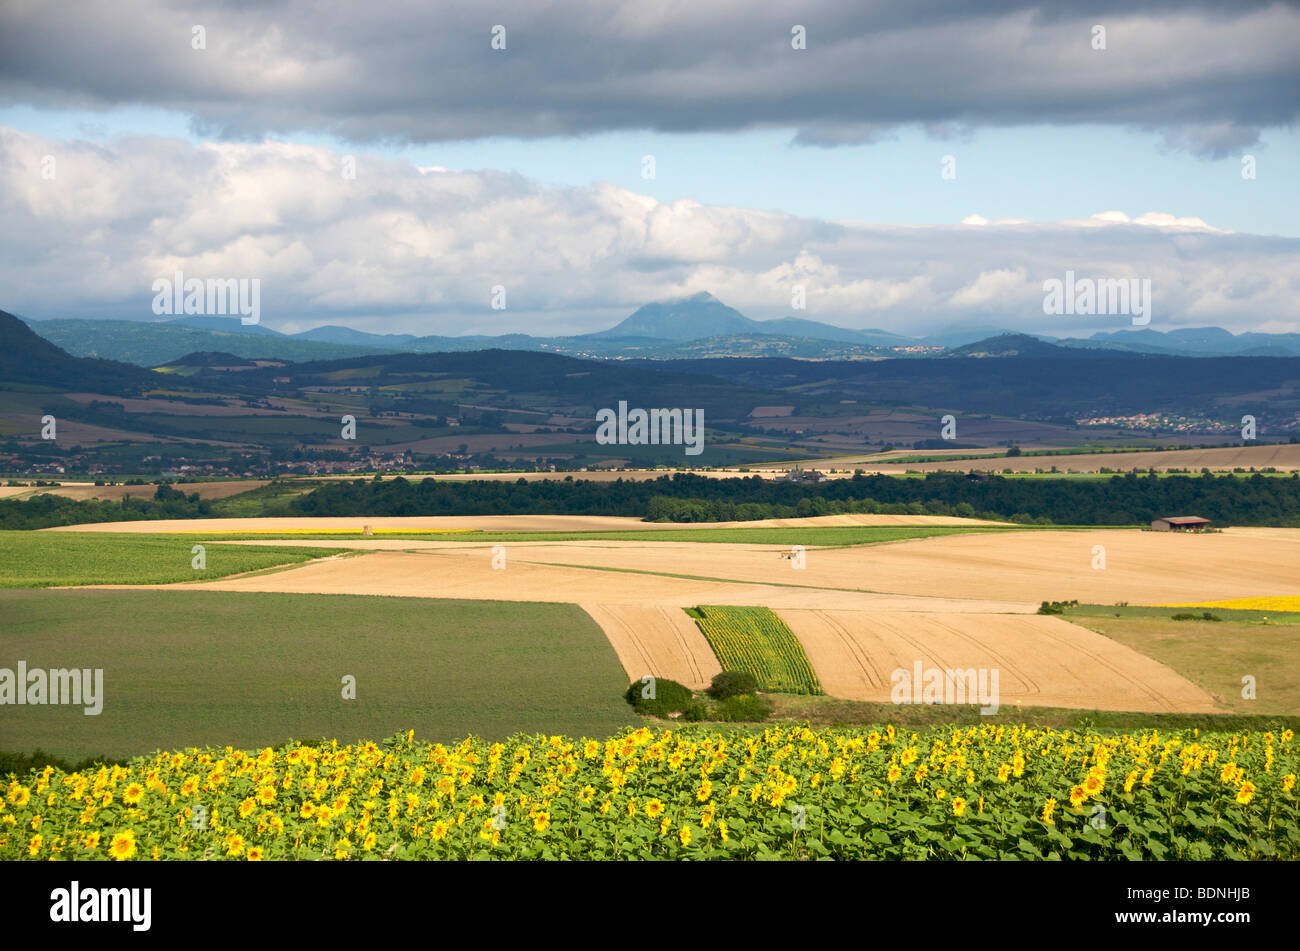 Plain of the Limagne with Puy de Dome volcano in Auvergne region, France. Stock Photo